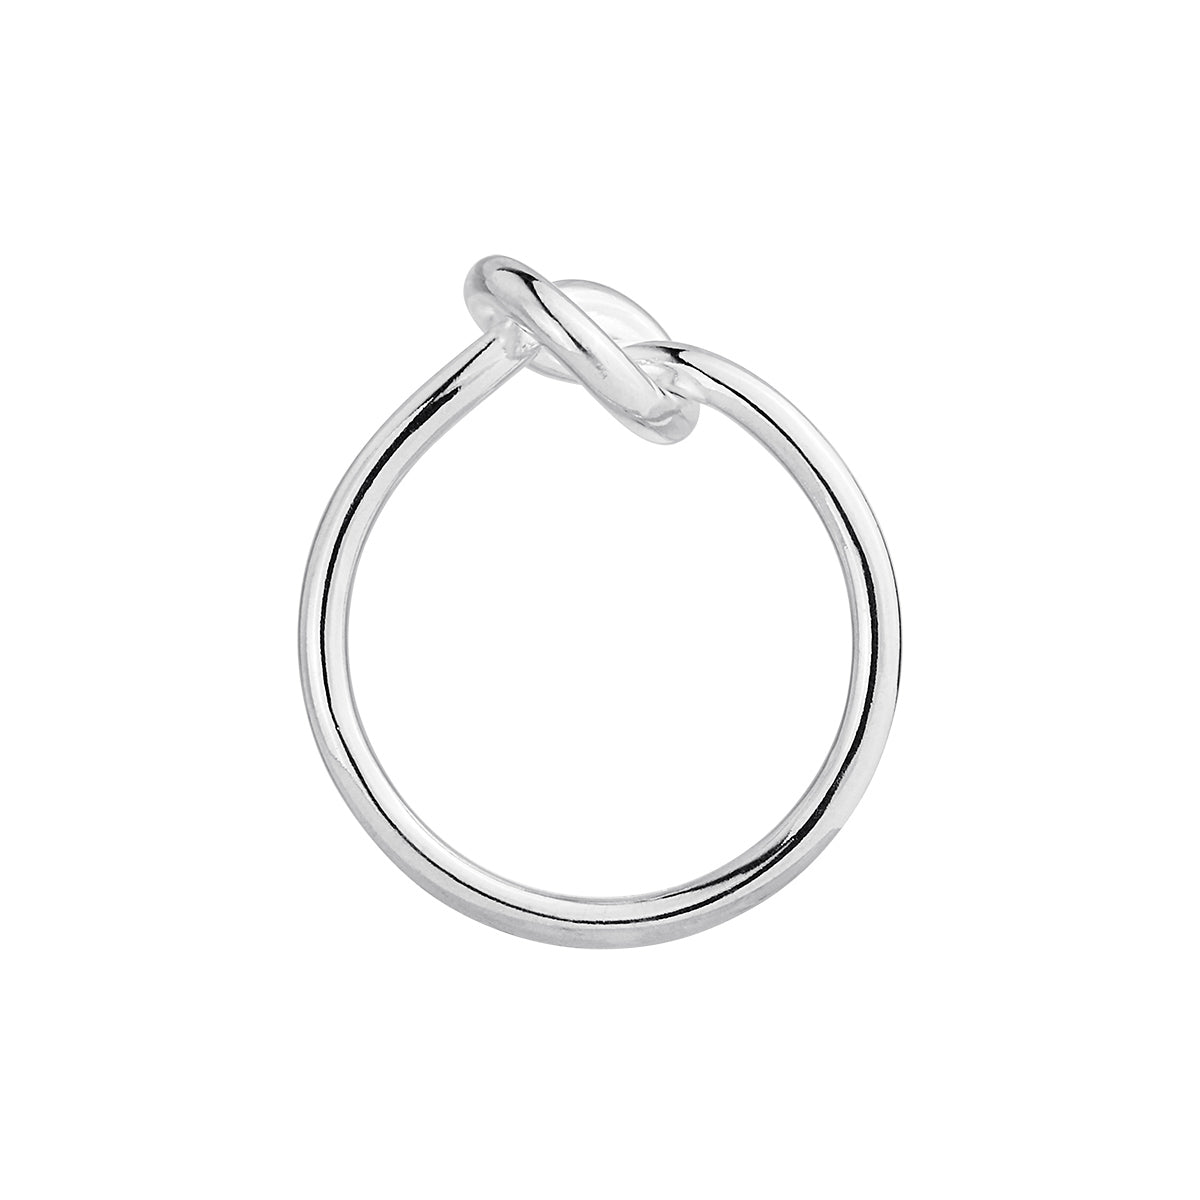 Silver wire knott ring